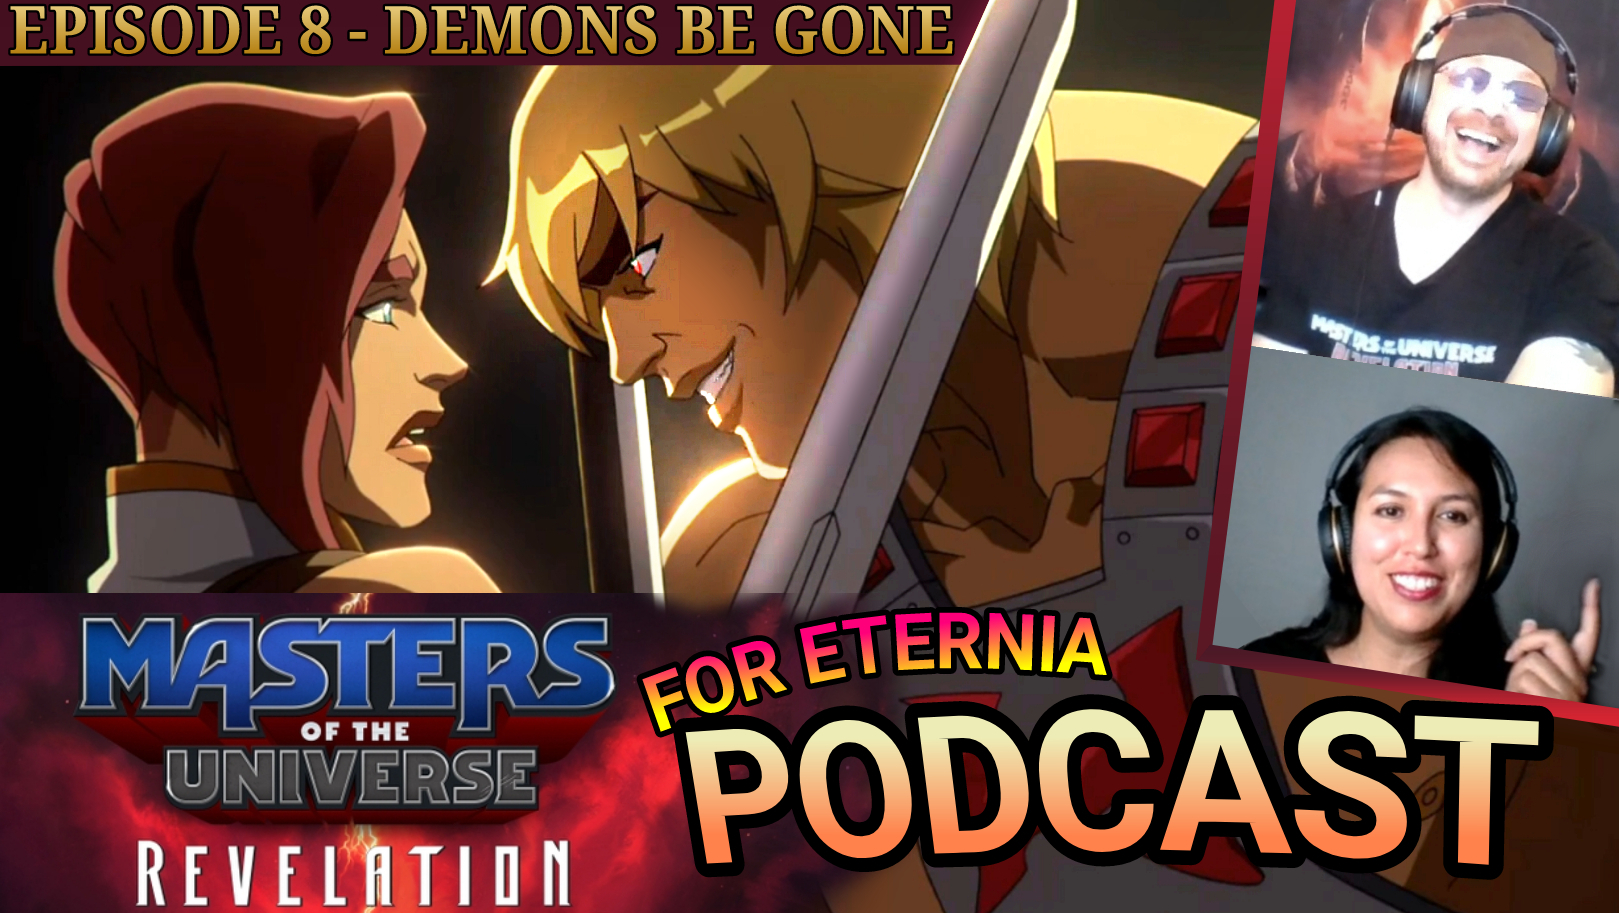 Talking ”Masters of the Universe: Revelation” Episode 4, Fan Fiction, Mexico’s He-Man & More! Listen to the FOR ETERNIA Podcast 008!